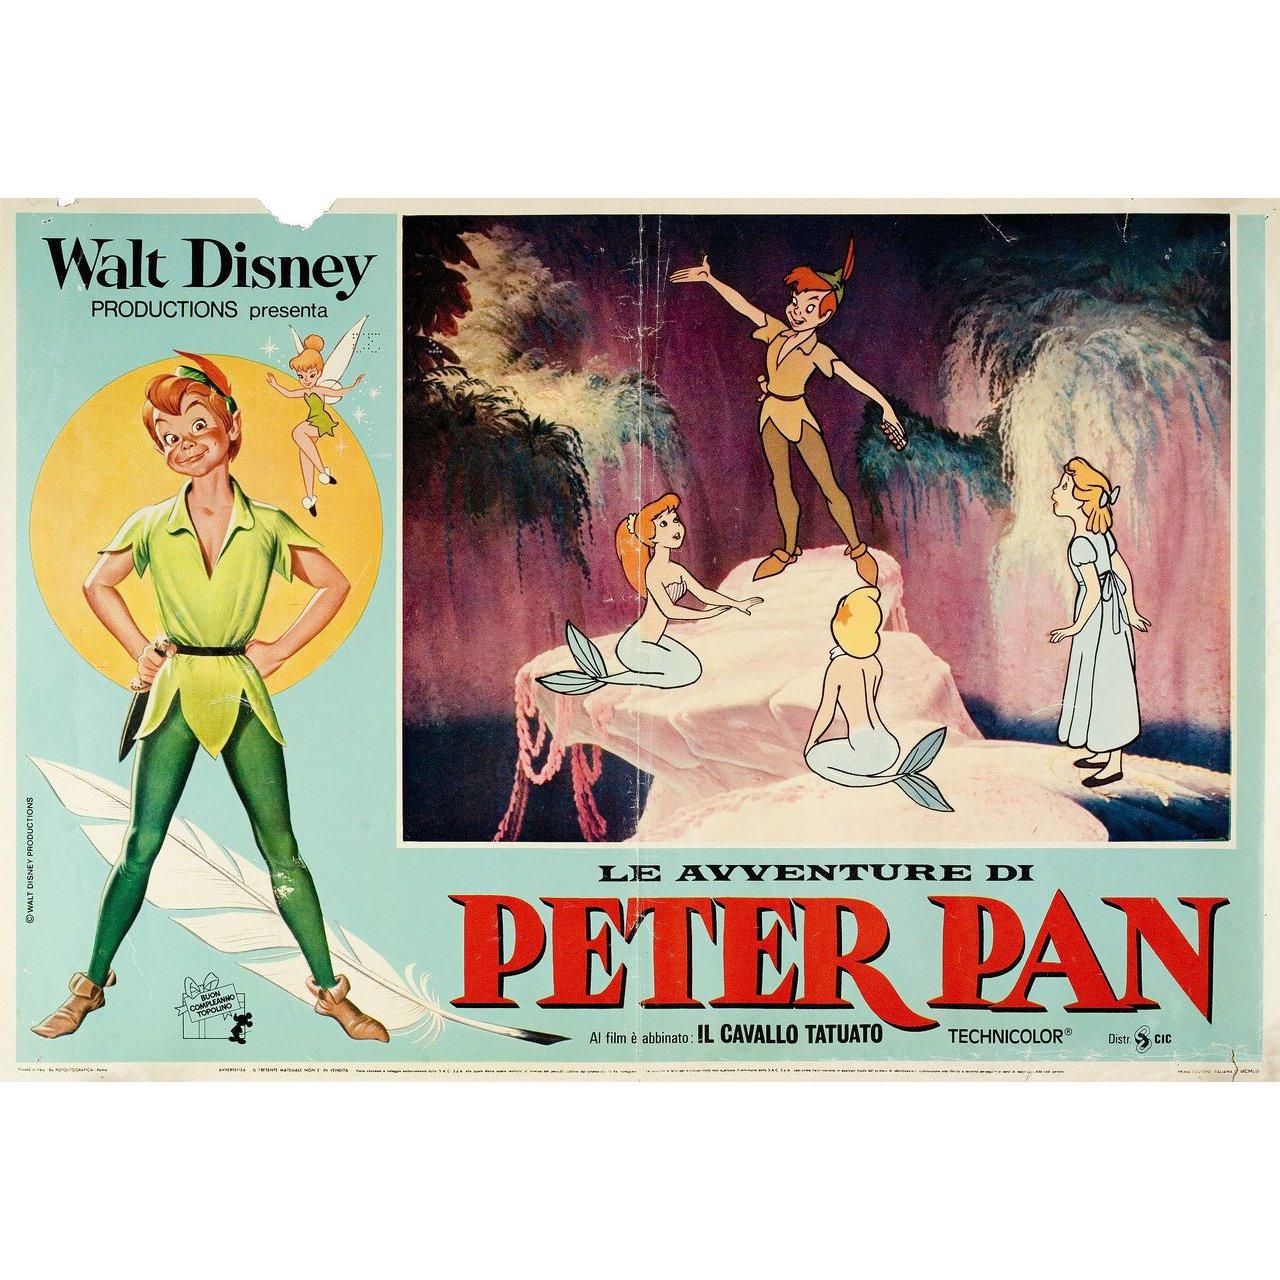 Original 1960s re-release Italian fotobusta poster for the 1953 film Peter Pan directed by Clyde Geronimi / Wilfred Jackson / Hamilton Luske / Jack Kinney with Bobby Driscoll / Kathryn Beaumont / Hans Conried / Bill Thompson. Good-very good